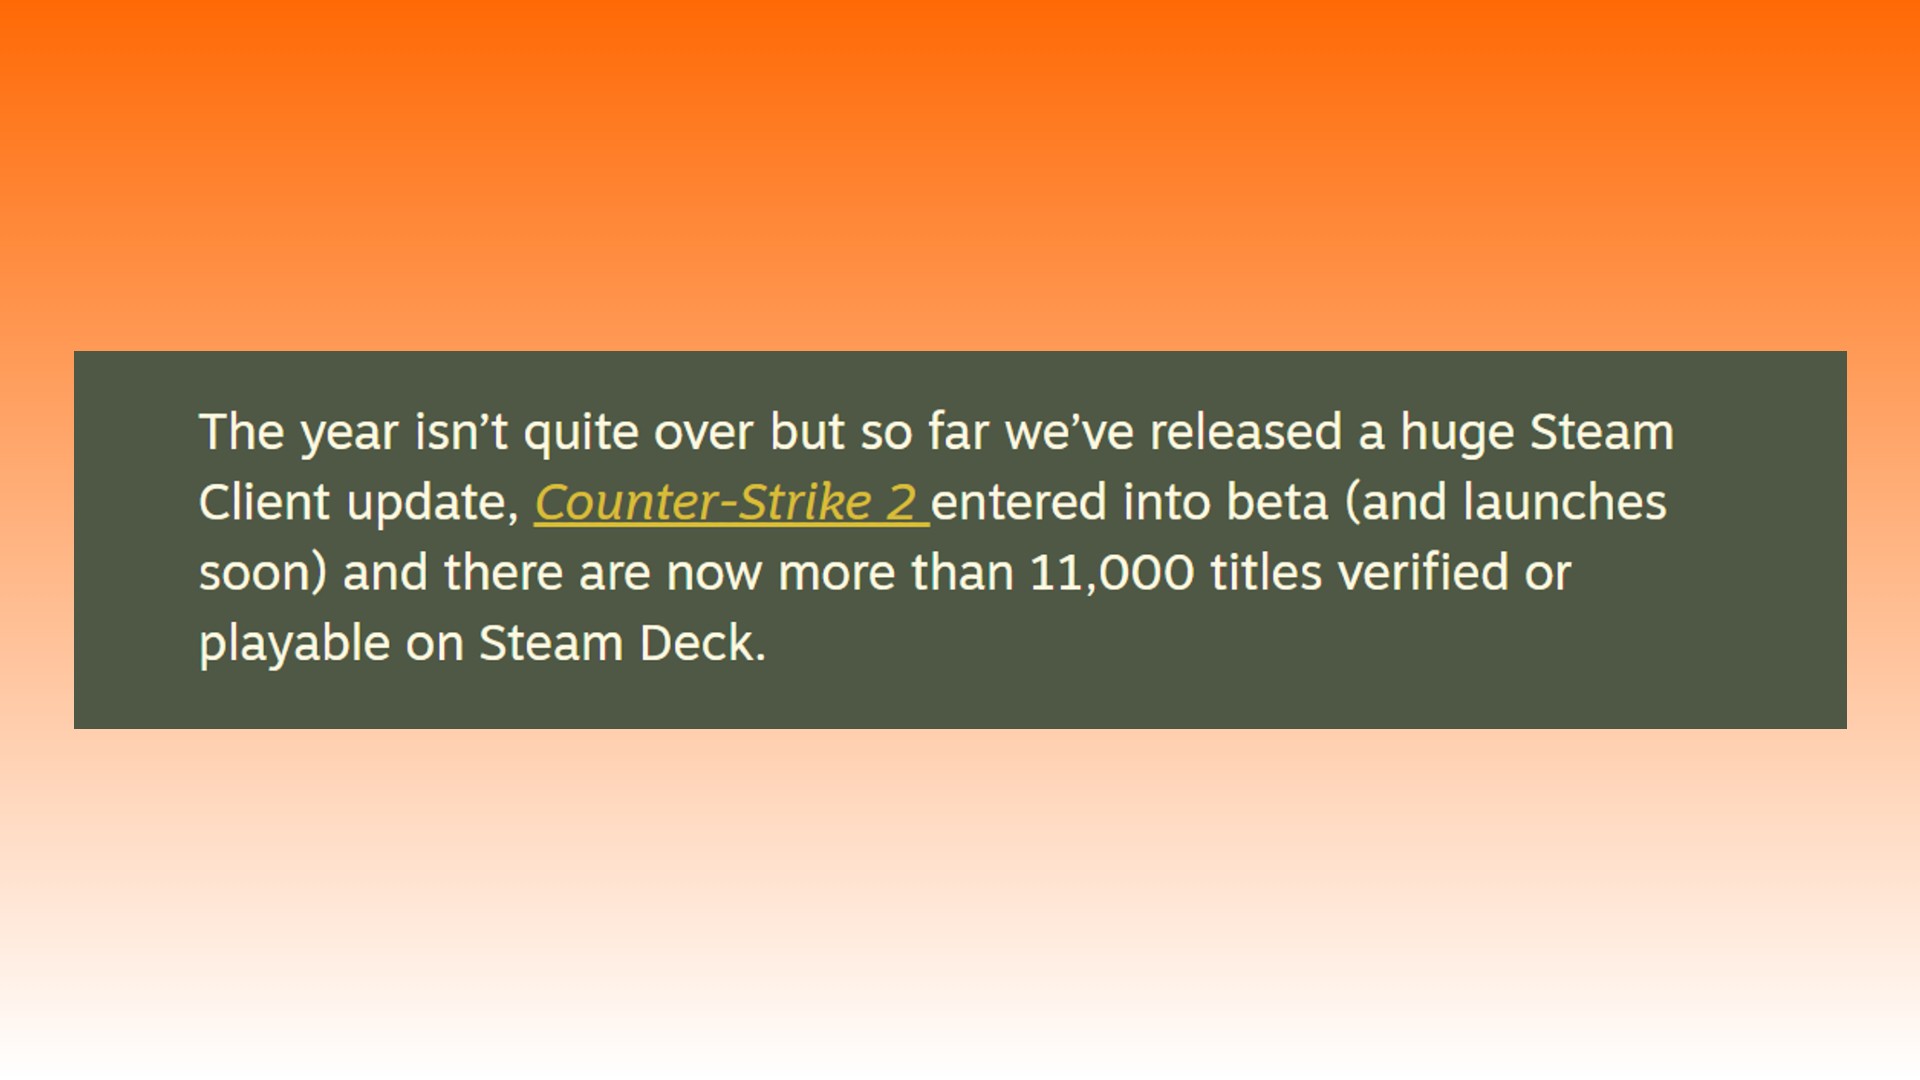 Counter-Strike 2 launch date: A statement from Valve regarding the launch of CSGO sequel Counter-Strike 2